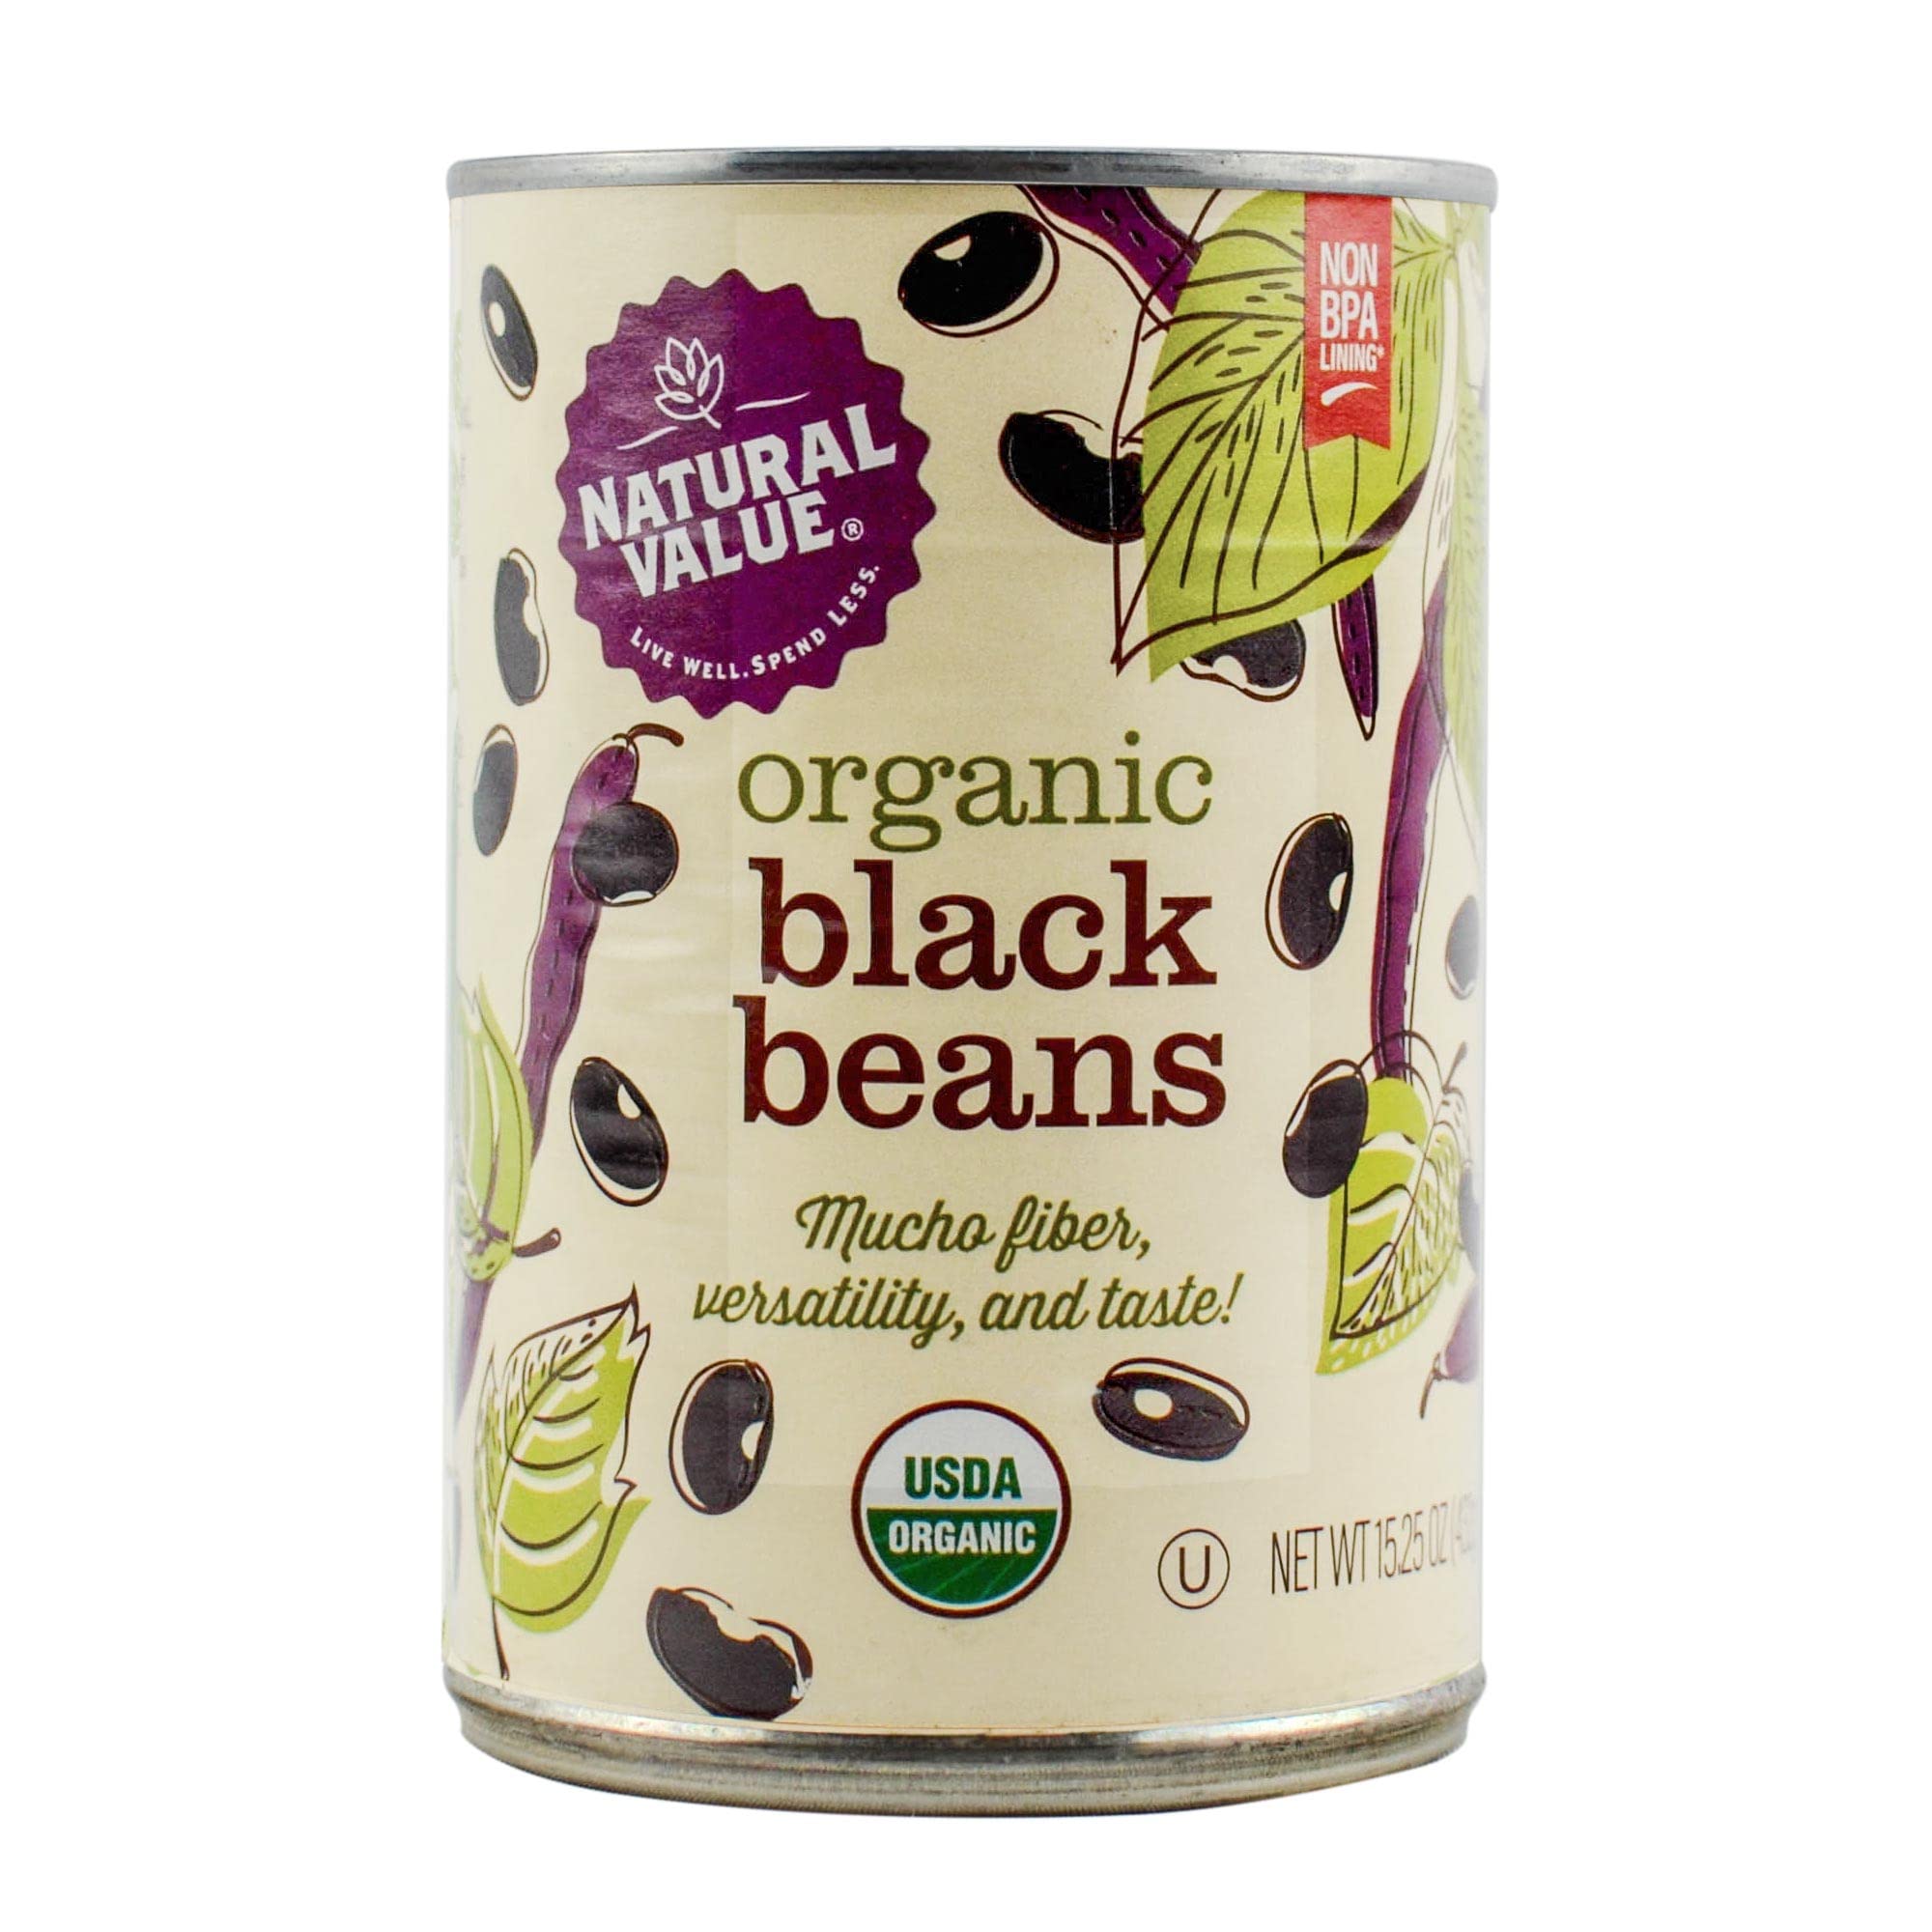 Natural Value Organic Black Beans, 15 Ounce (Pack of 12)